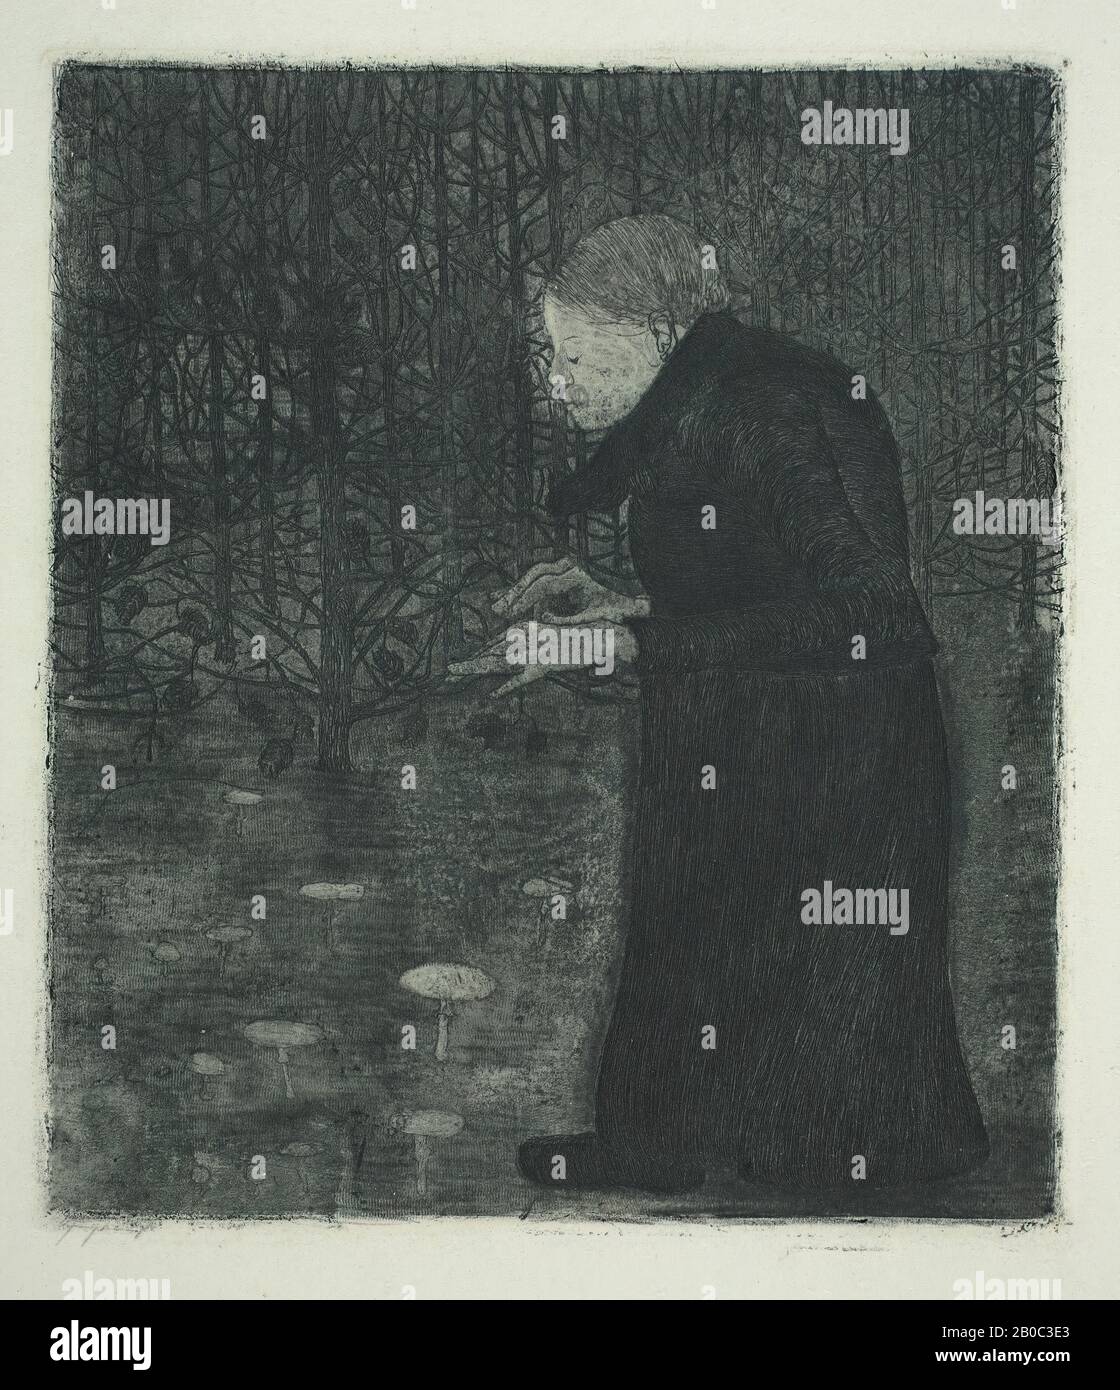 Paula Modersohn-Becker, Blind Woman in the Forest (Blinde Frau im Walde), n.d., etching with aquatint on paper, 17 11/16 in. x 12 1/2 in. (44.93 cm x 31.75 cm Stock Photo